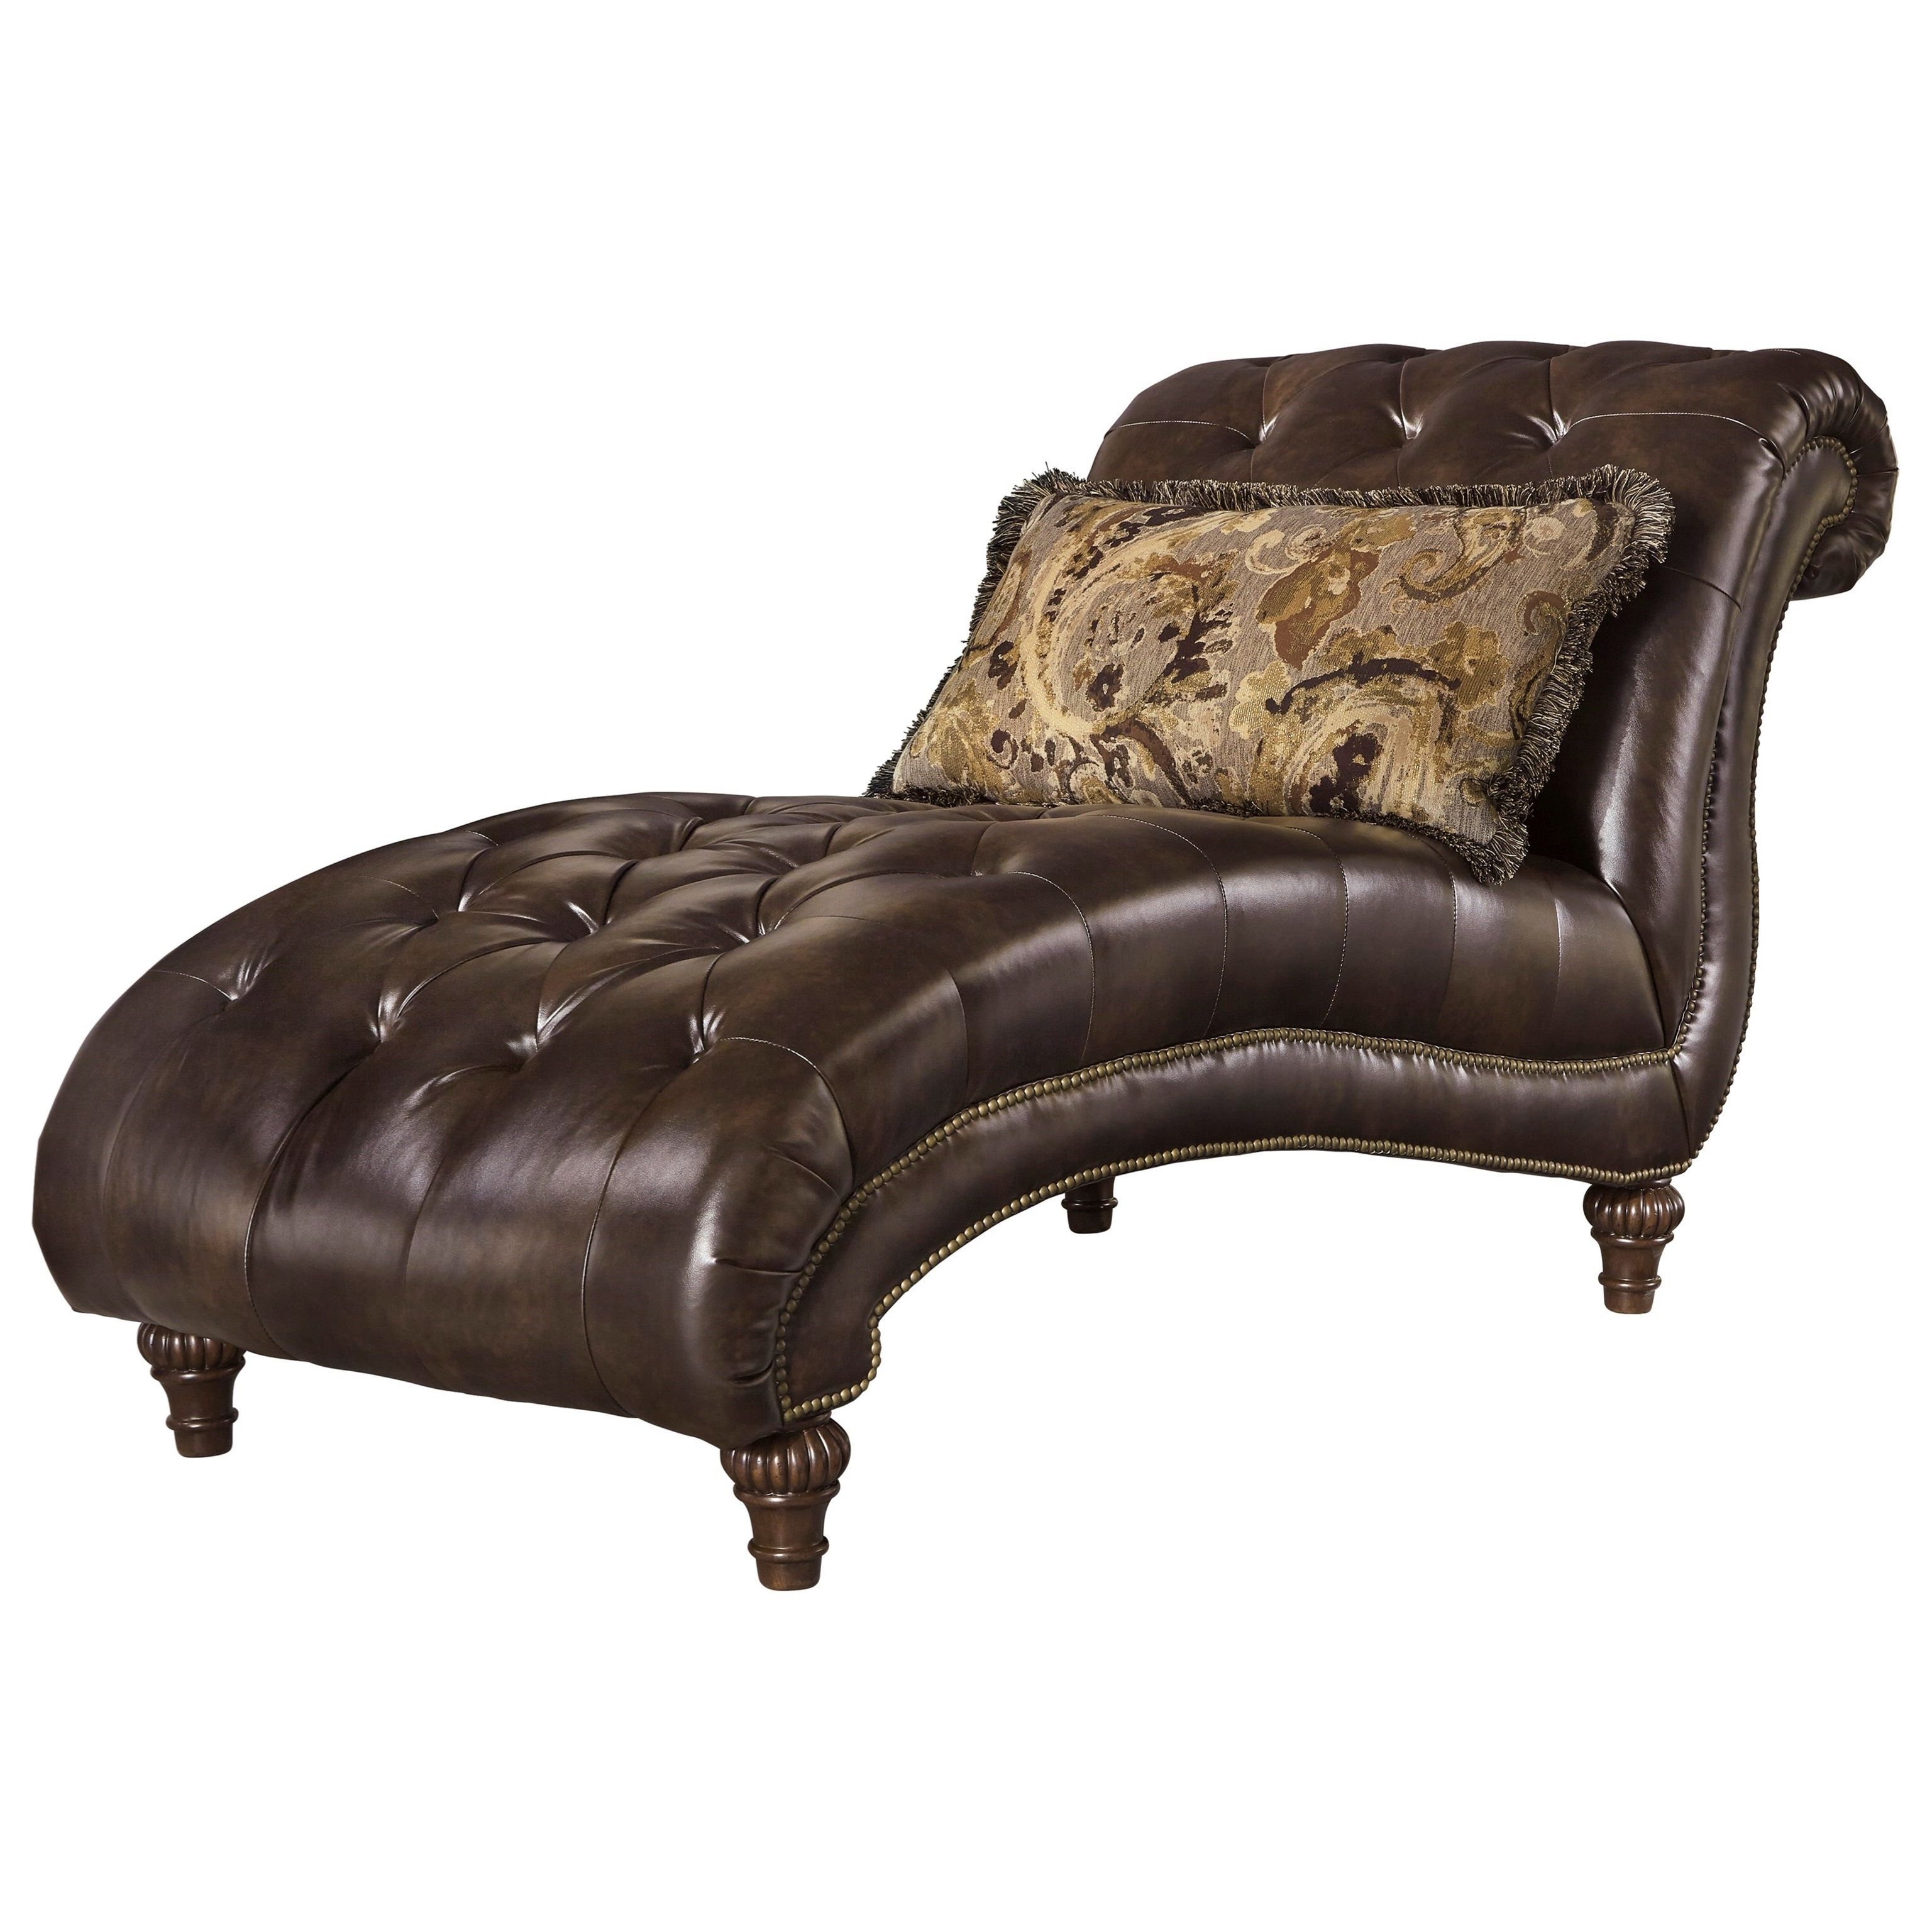 Signature Designashley Winnsboro Durablend Traditional Tufted For Most Popular Ashley Chaise Lounges (Photo 9 of 15)